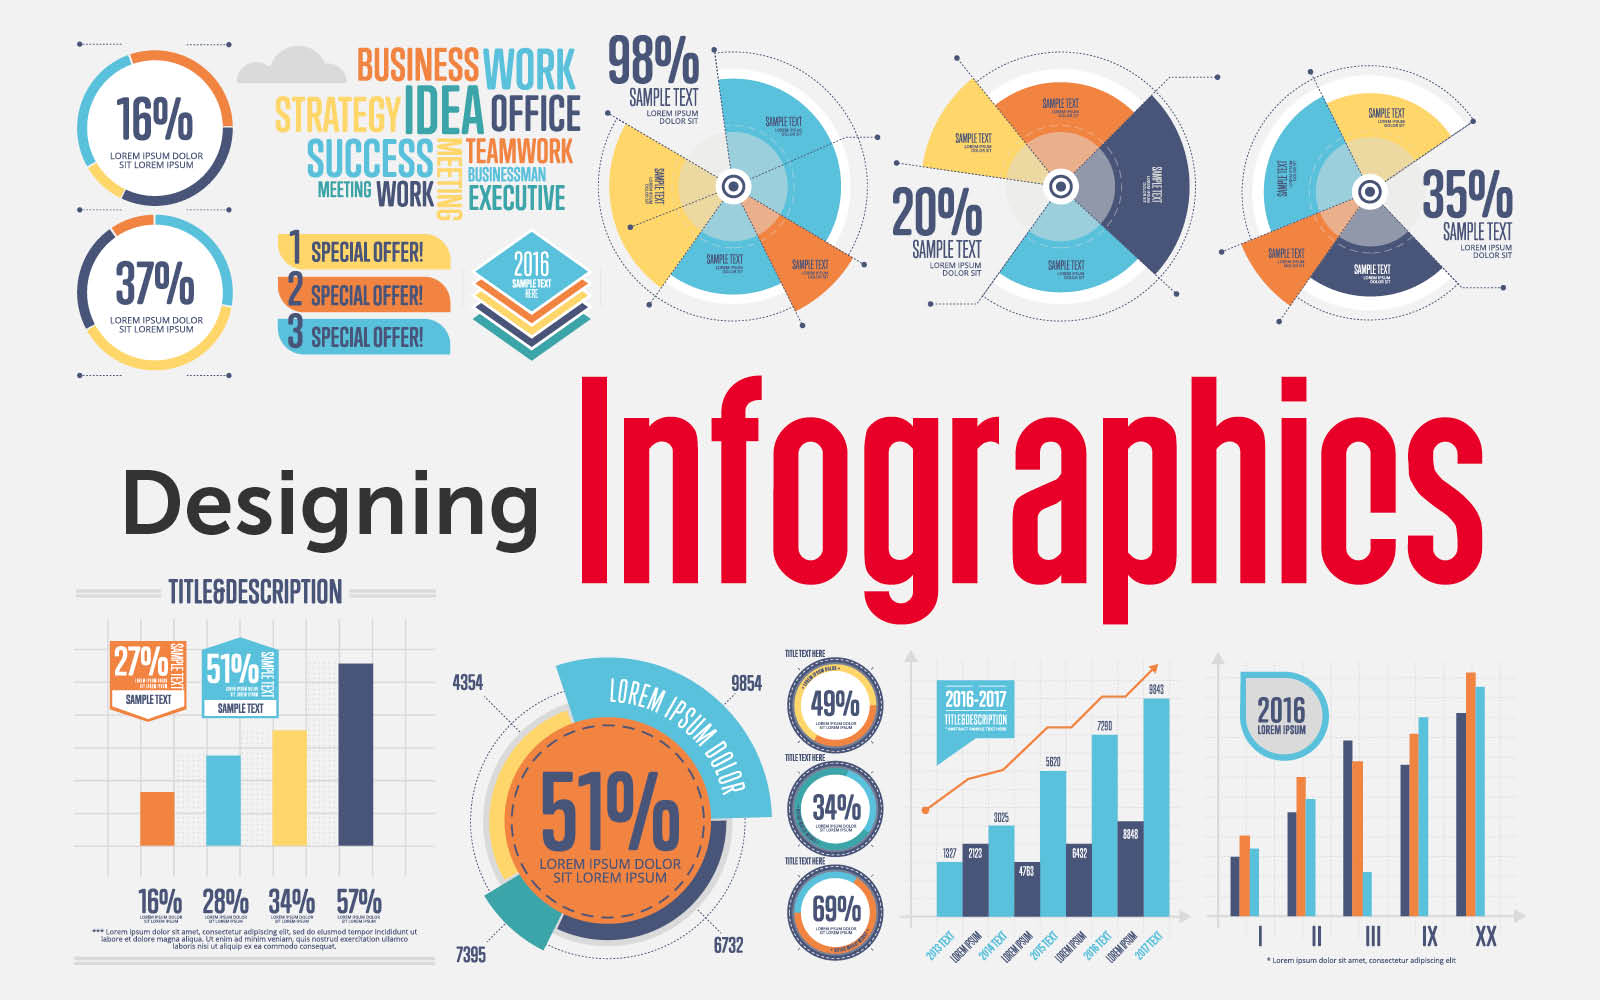 infographics about infographics